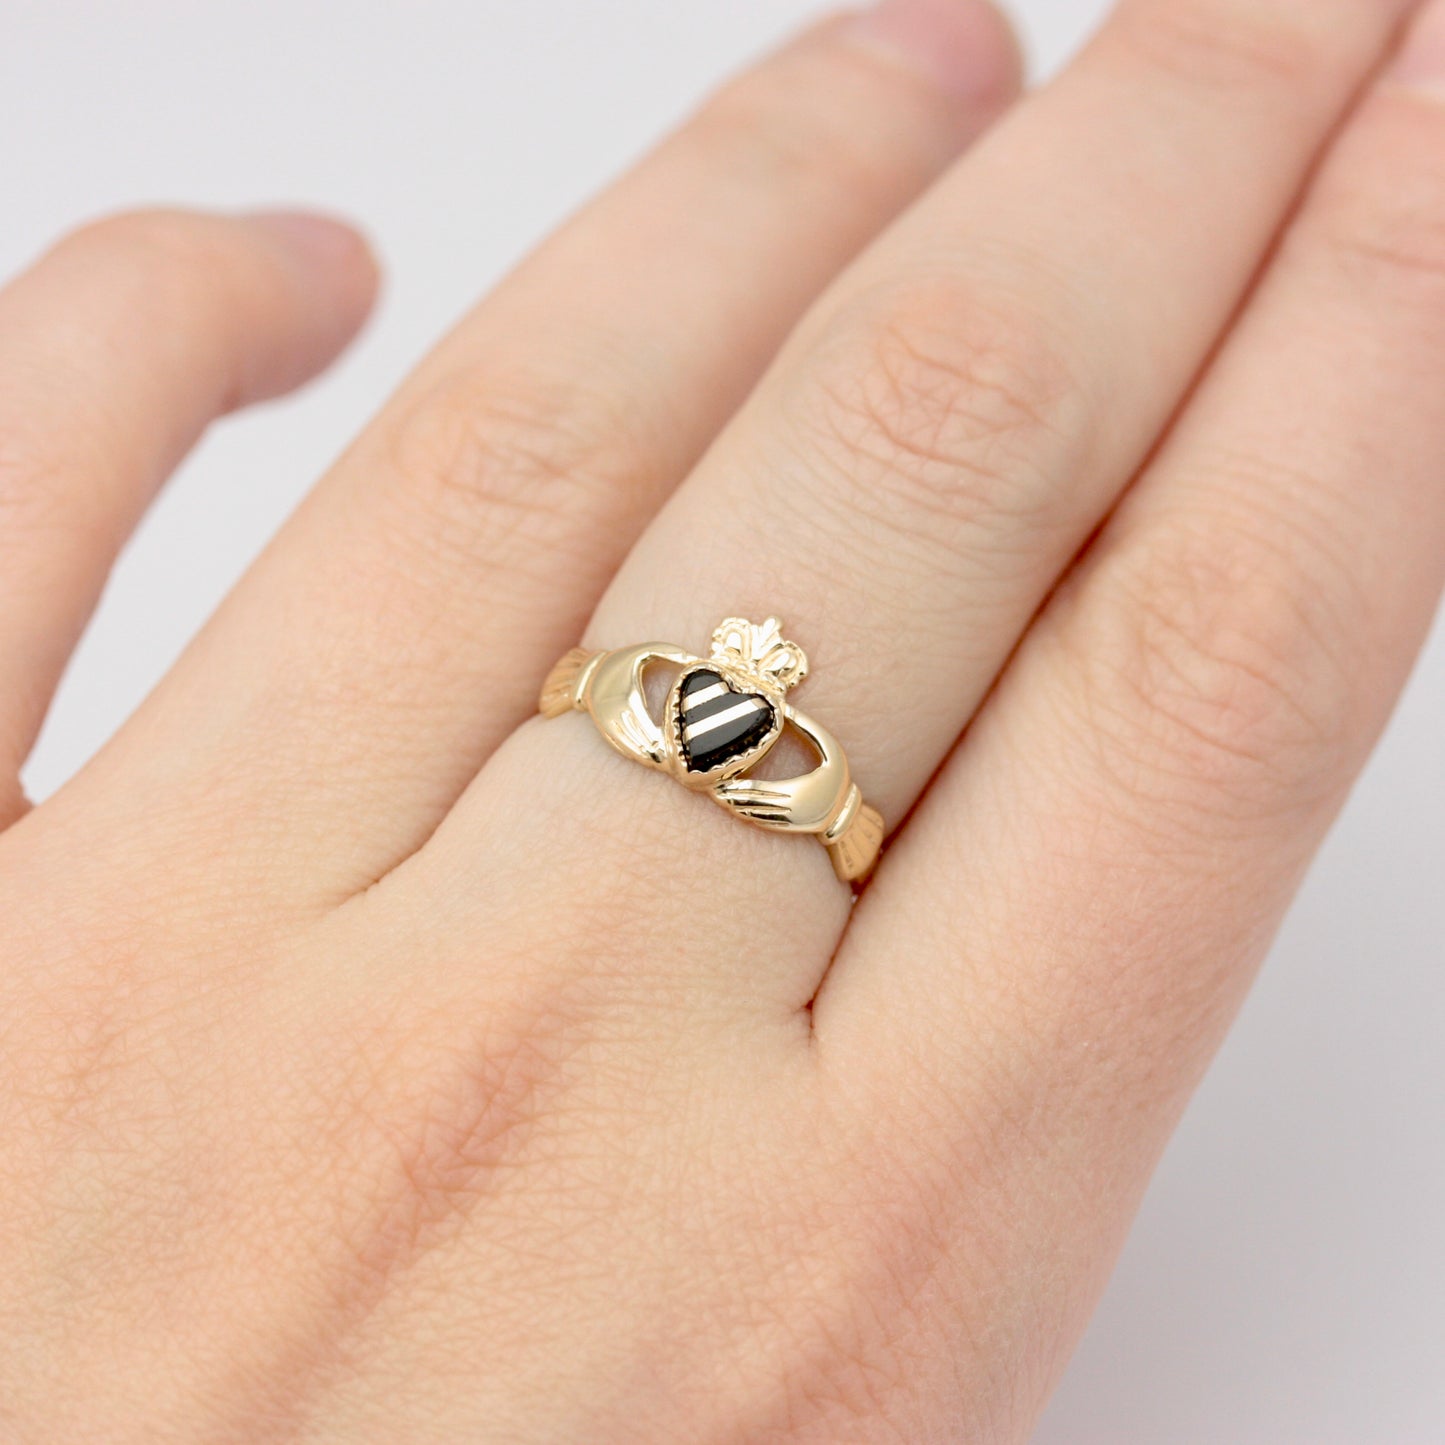 Vintage 9ct Gold Claddagh Ring with Gold Striped Black Onyx Heart, 1987